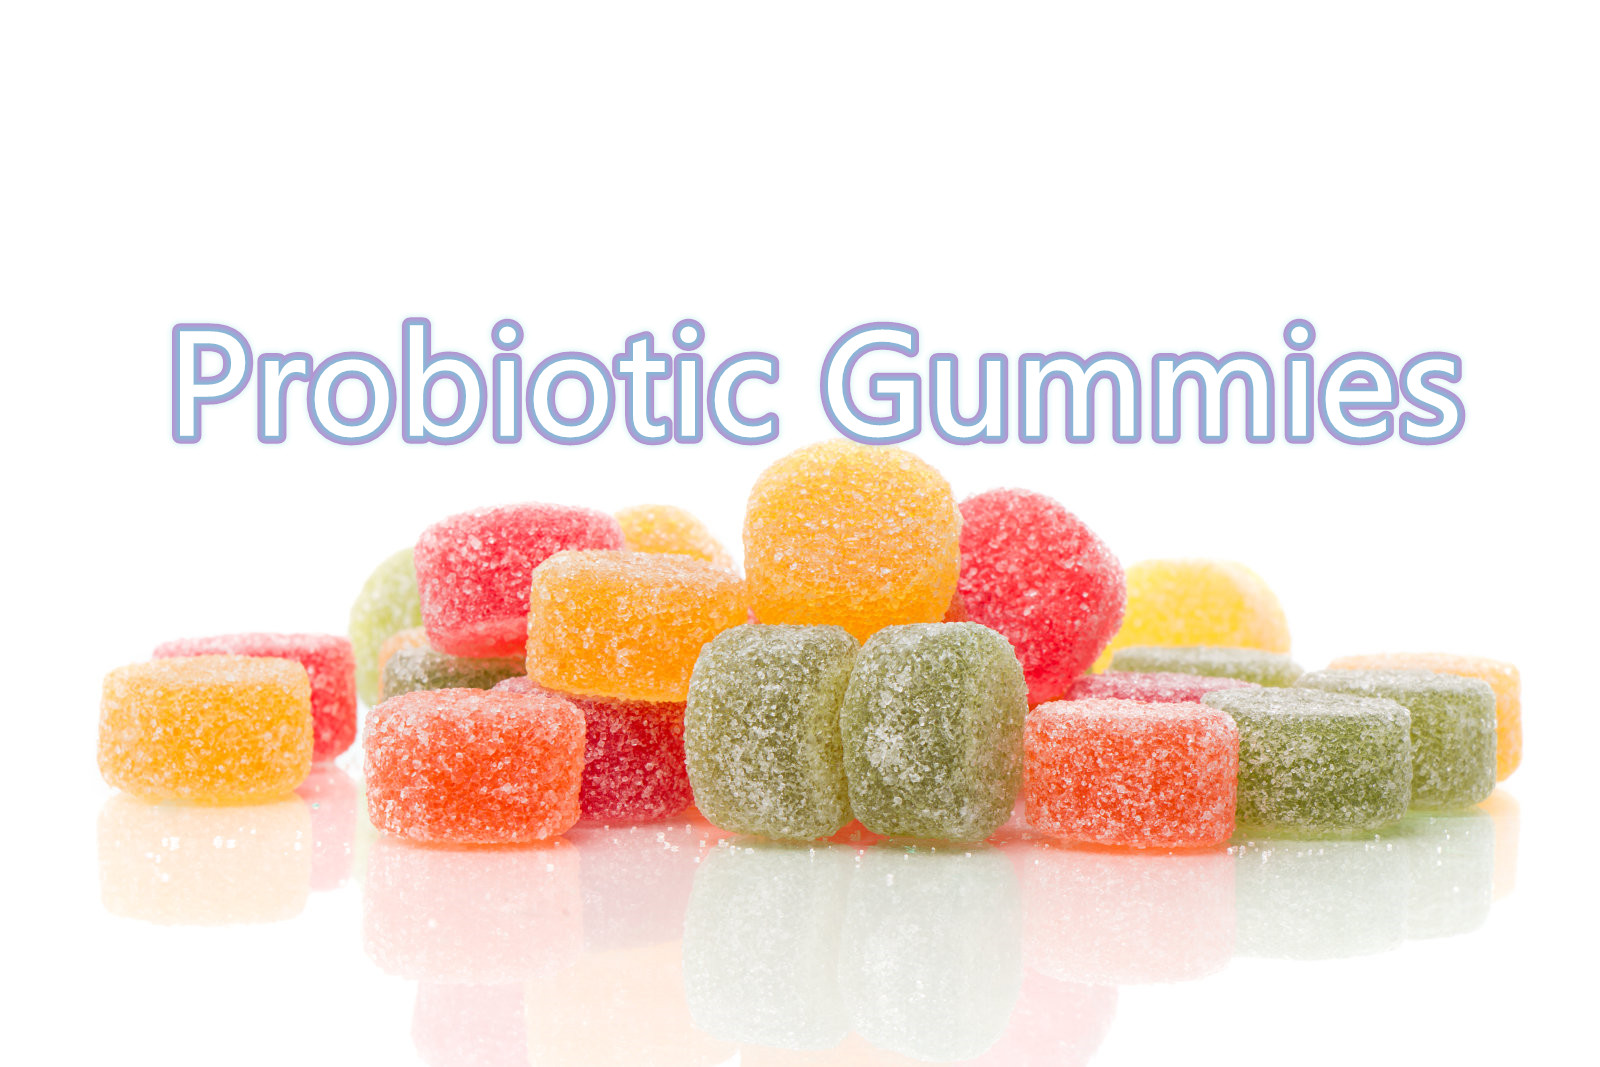 Boost Gut Health with Probiotic Gummies